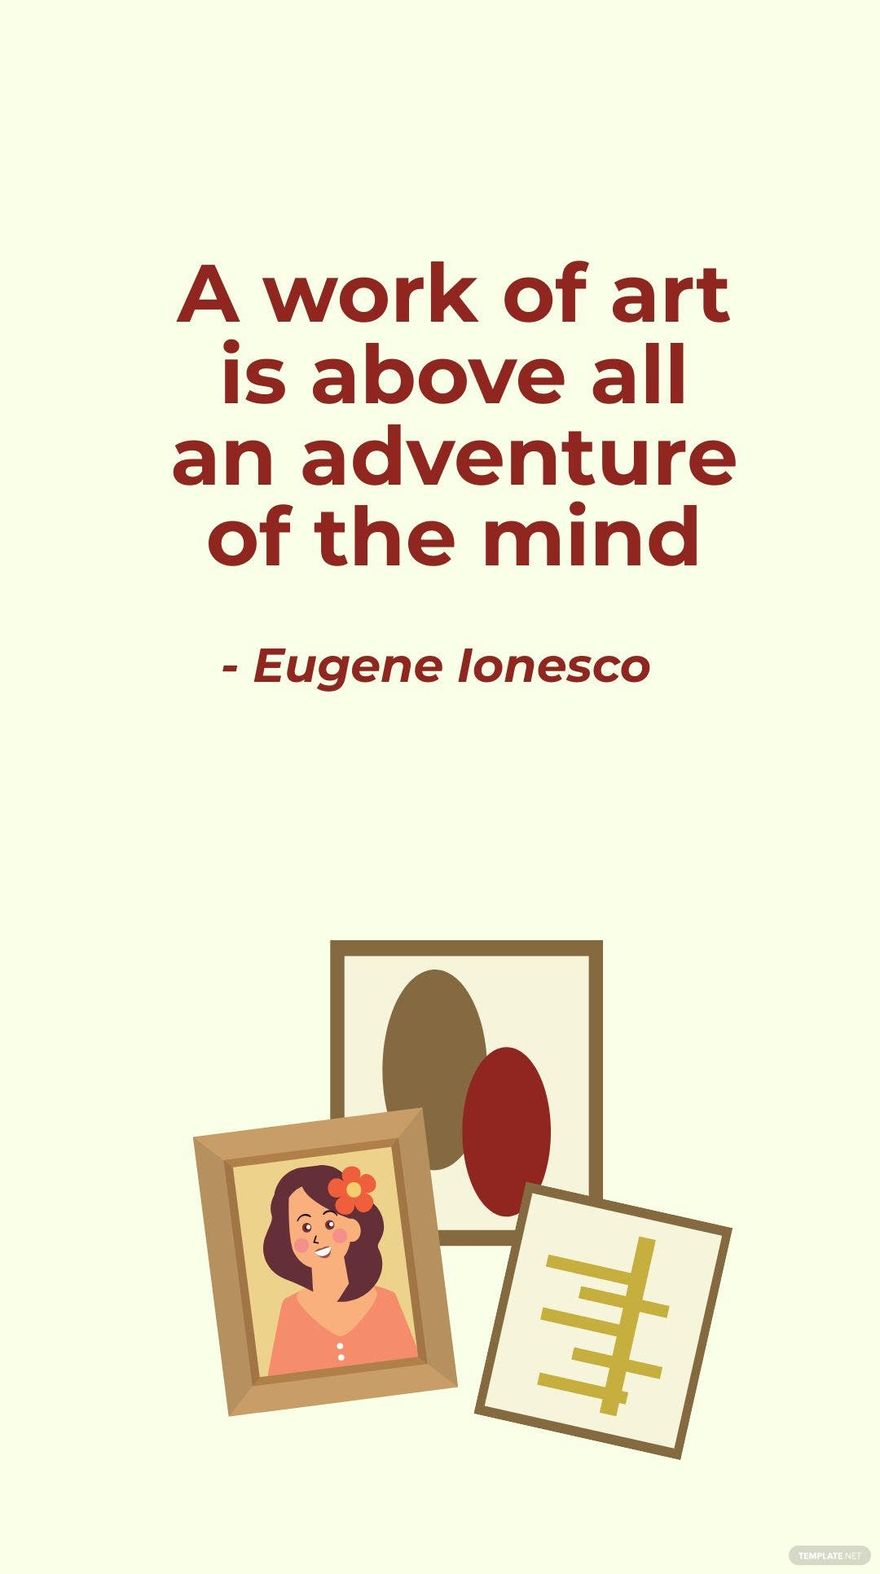 Eugene Ionesco - A work of art is above all an adventure of the mind